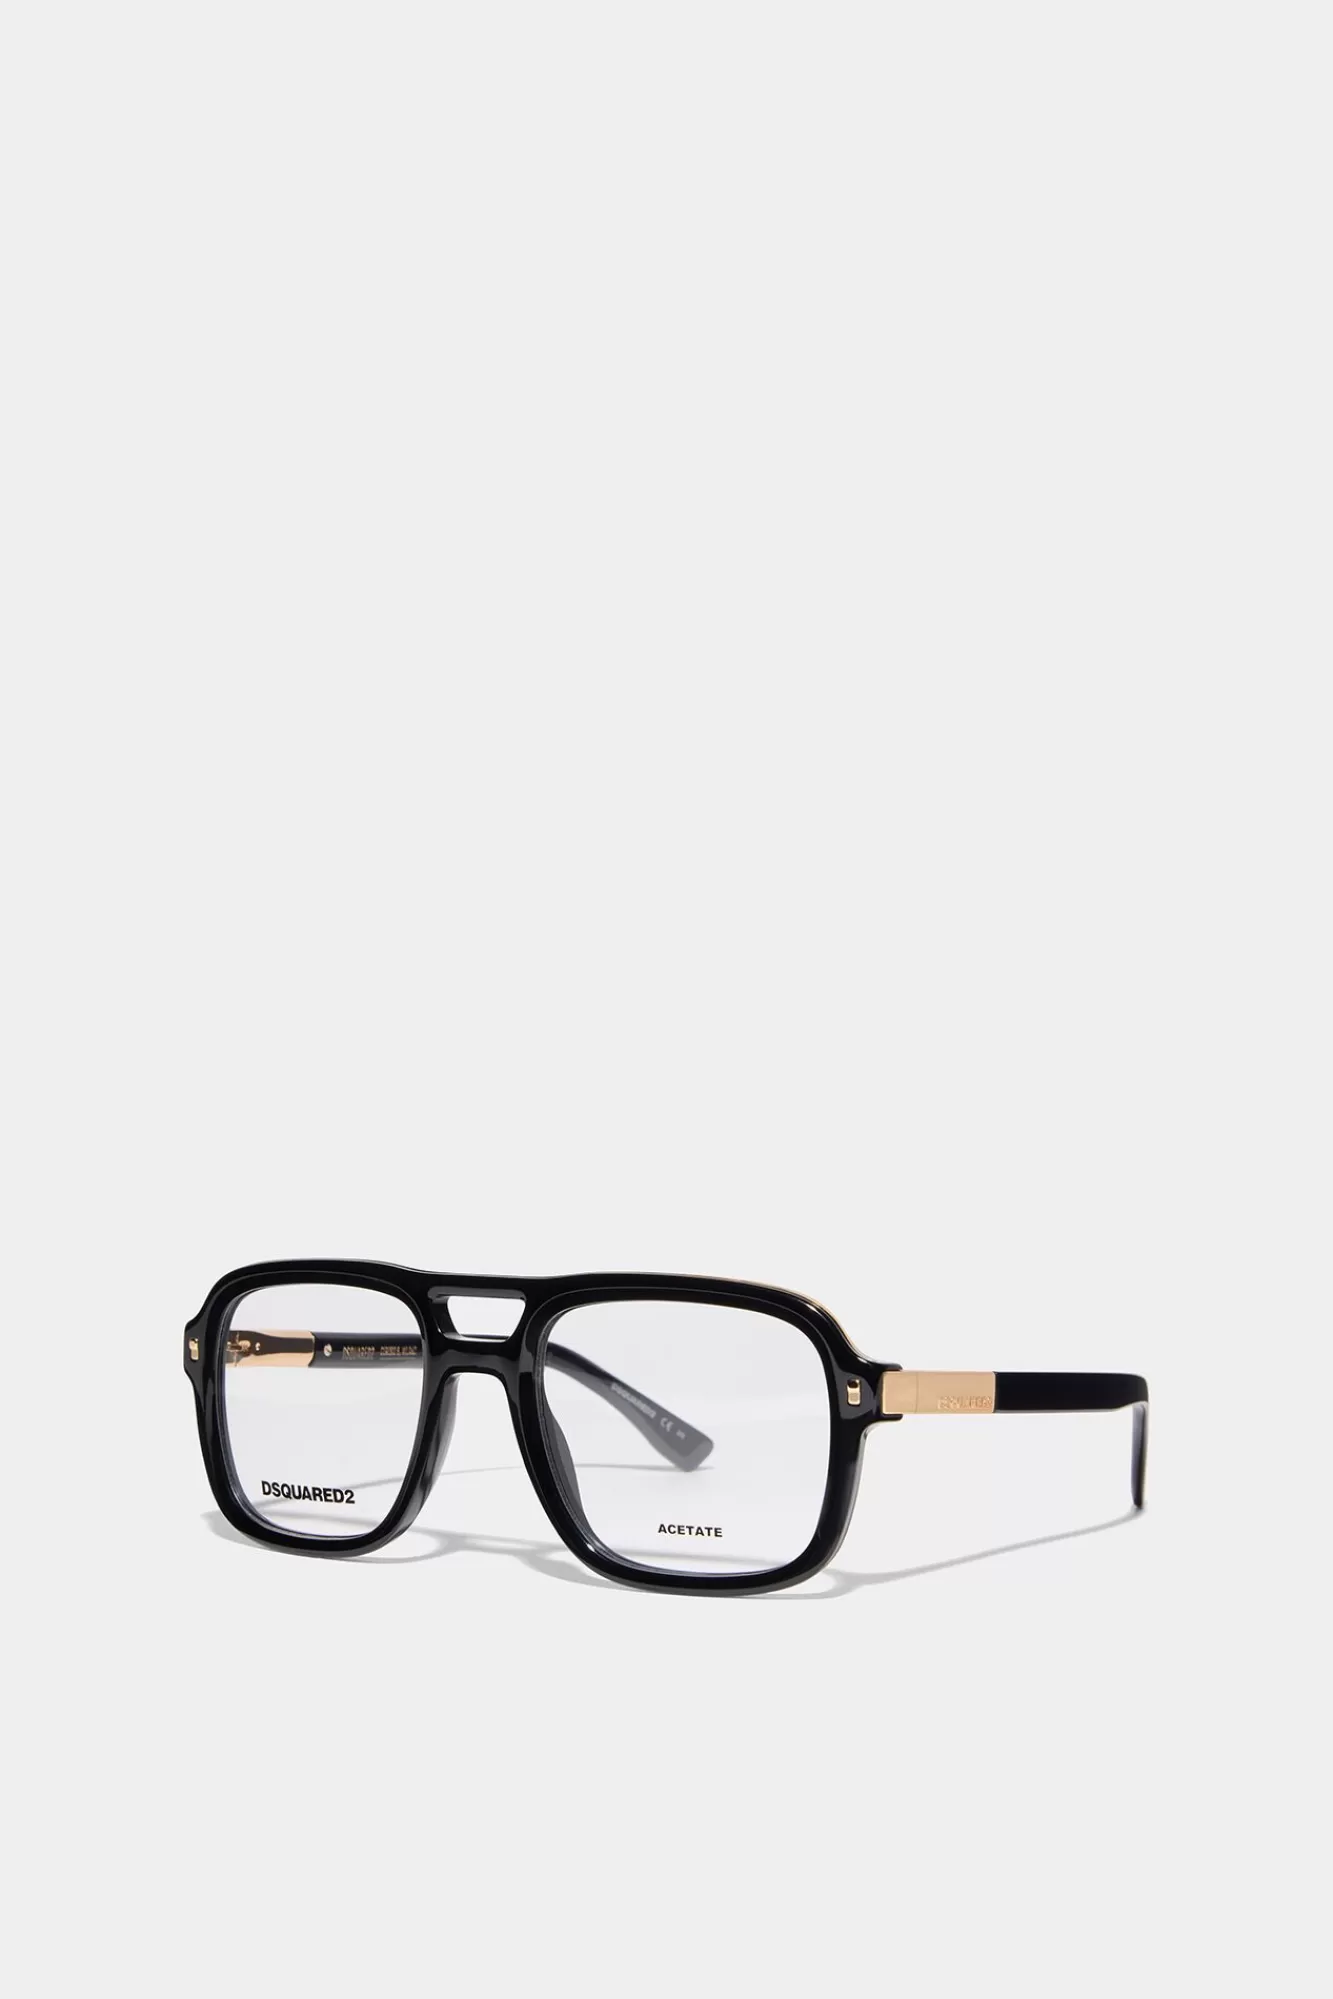 Hype Gold Optical Glasses<Dsquared2 Discount